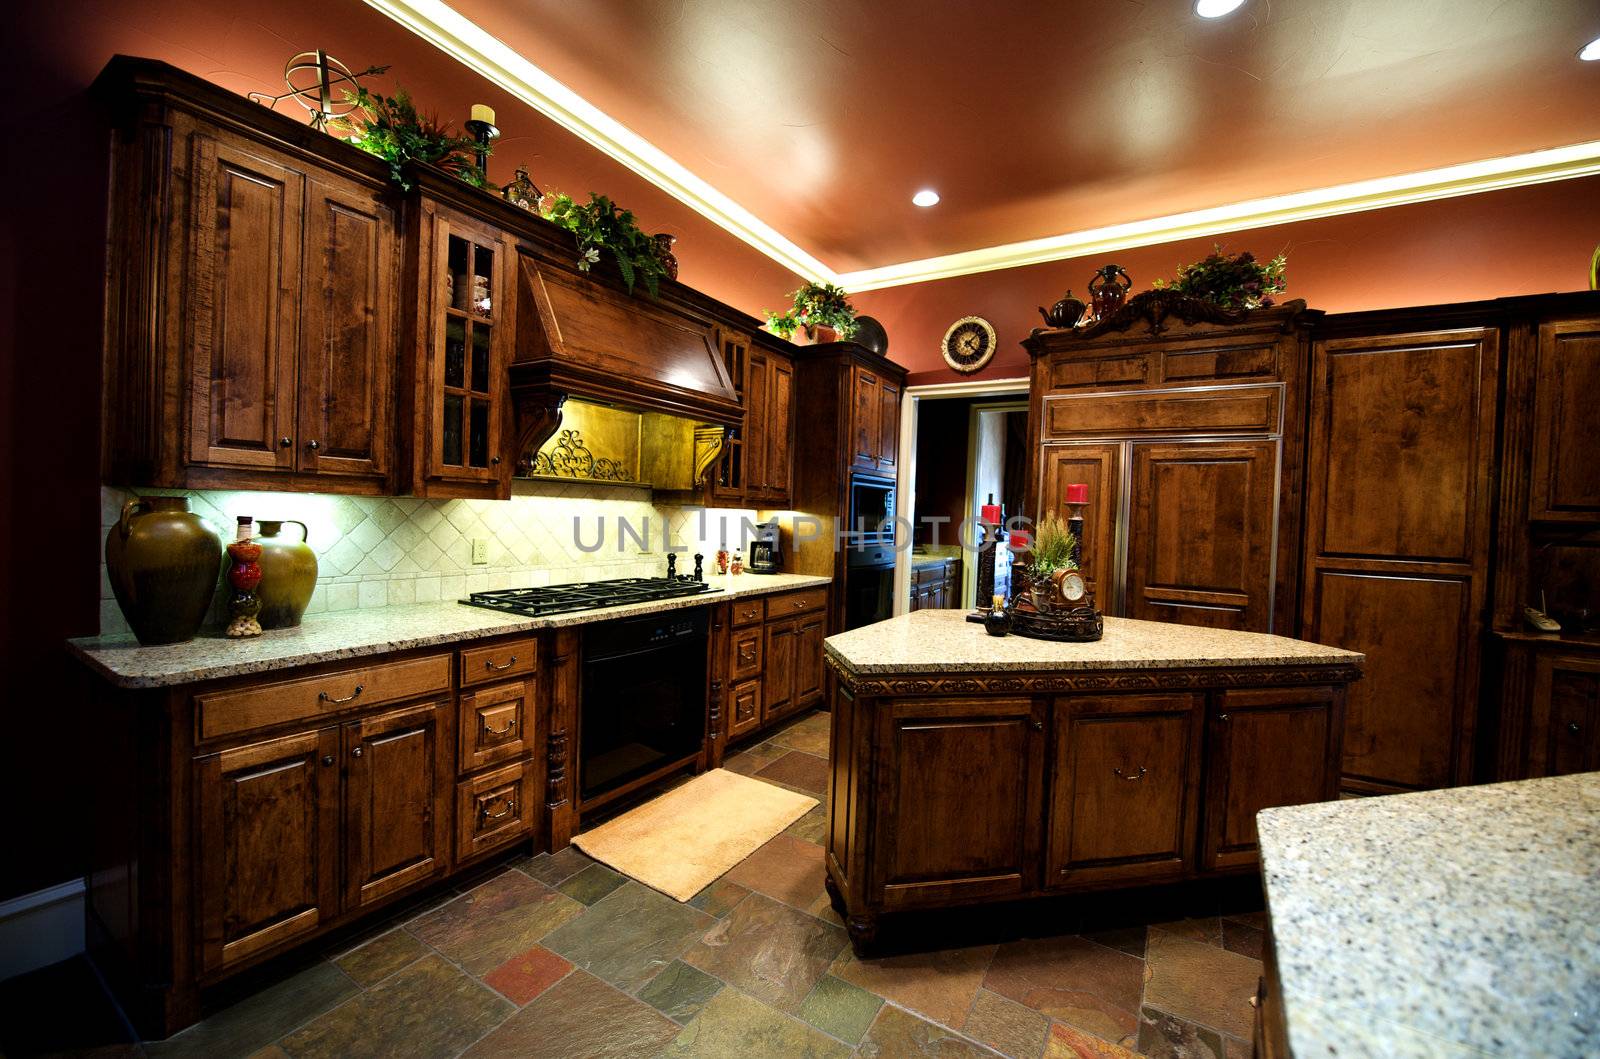 An image of a luxurious decorated kitchen